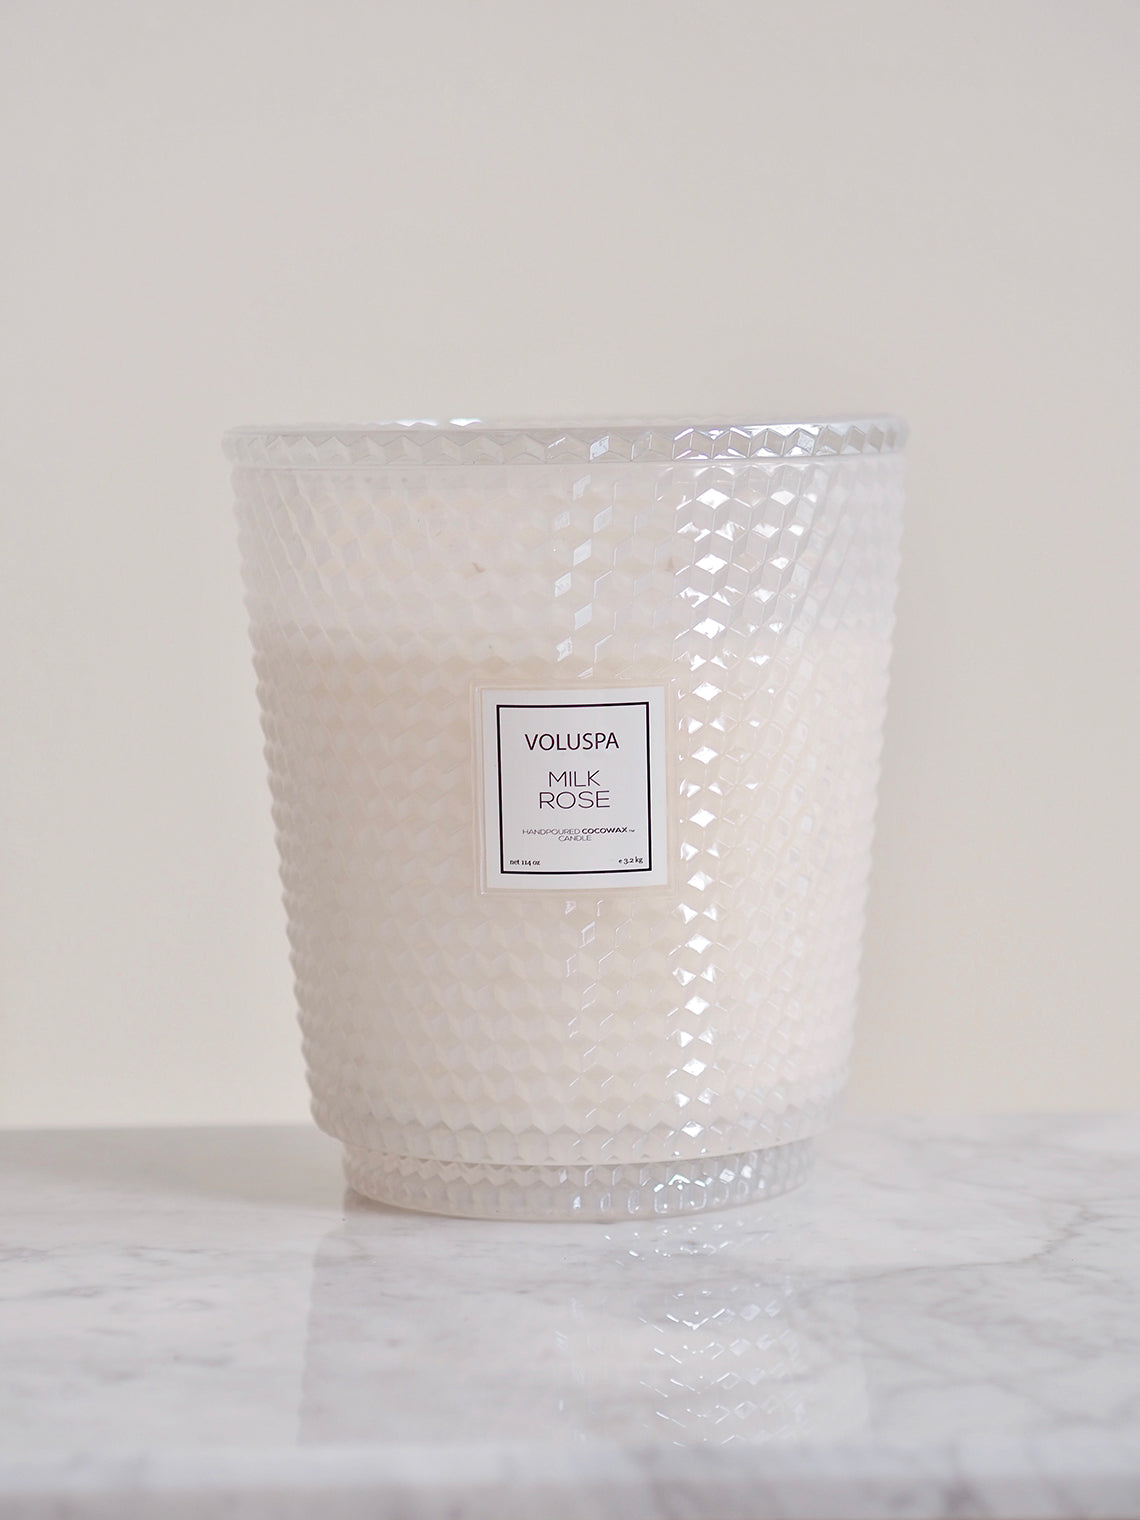 Milk Rose 5 Wick Hearth Candle